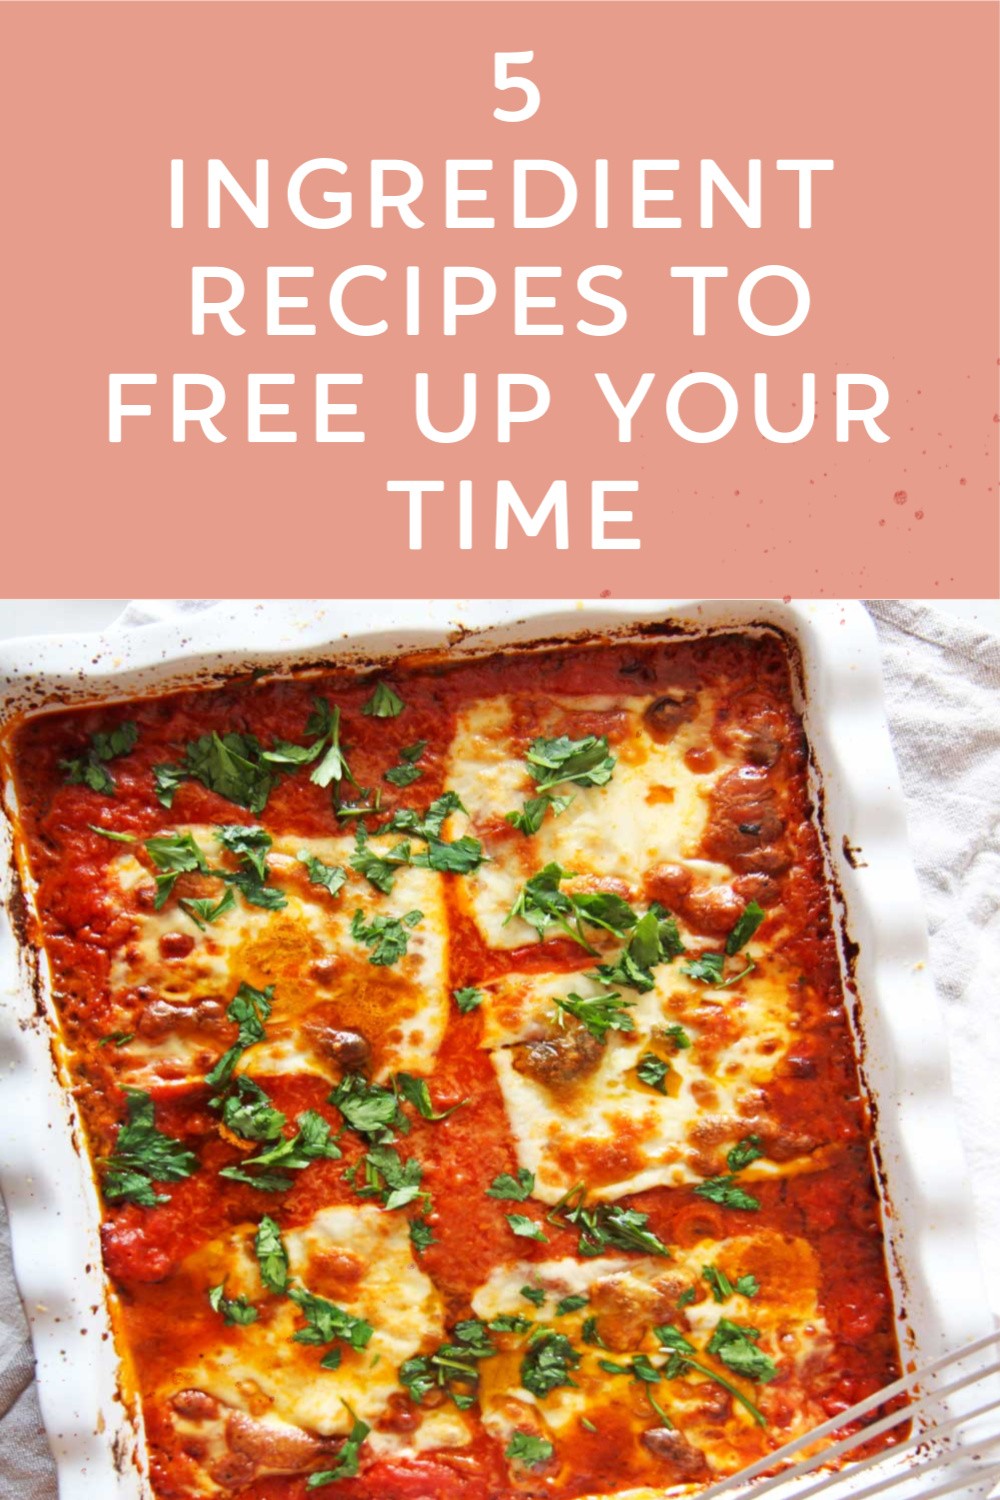 Easy Five Ingredient Recipes To Free Up Your Time. Easy dinner recipes. www.ChopHappy.com #5Ingredients #busymom